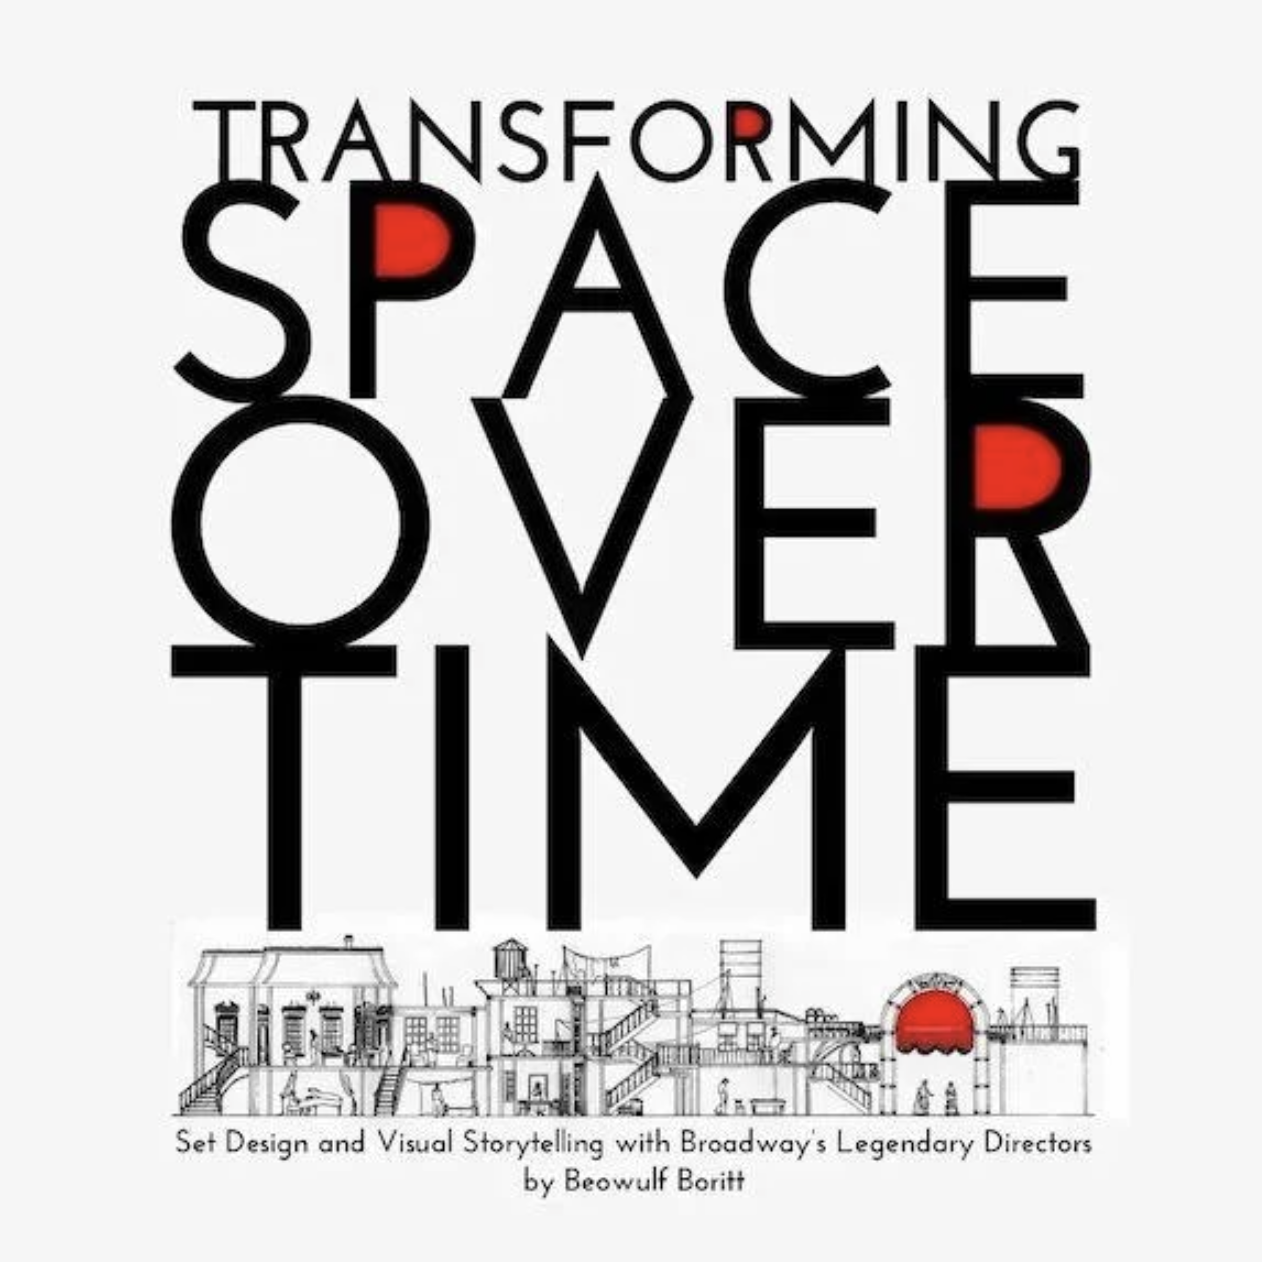 The cover of Beowulf Boritt's book "Transforming Space Over Time"